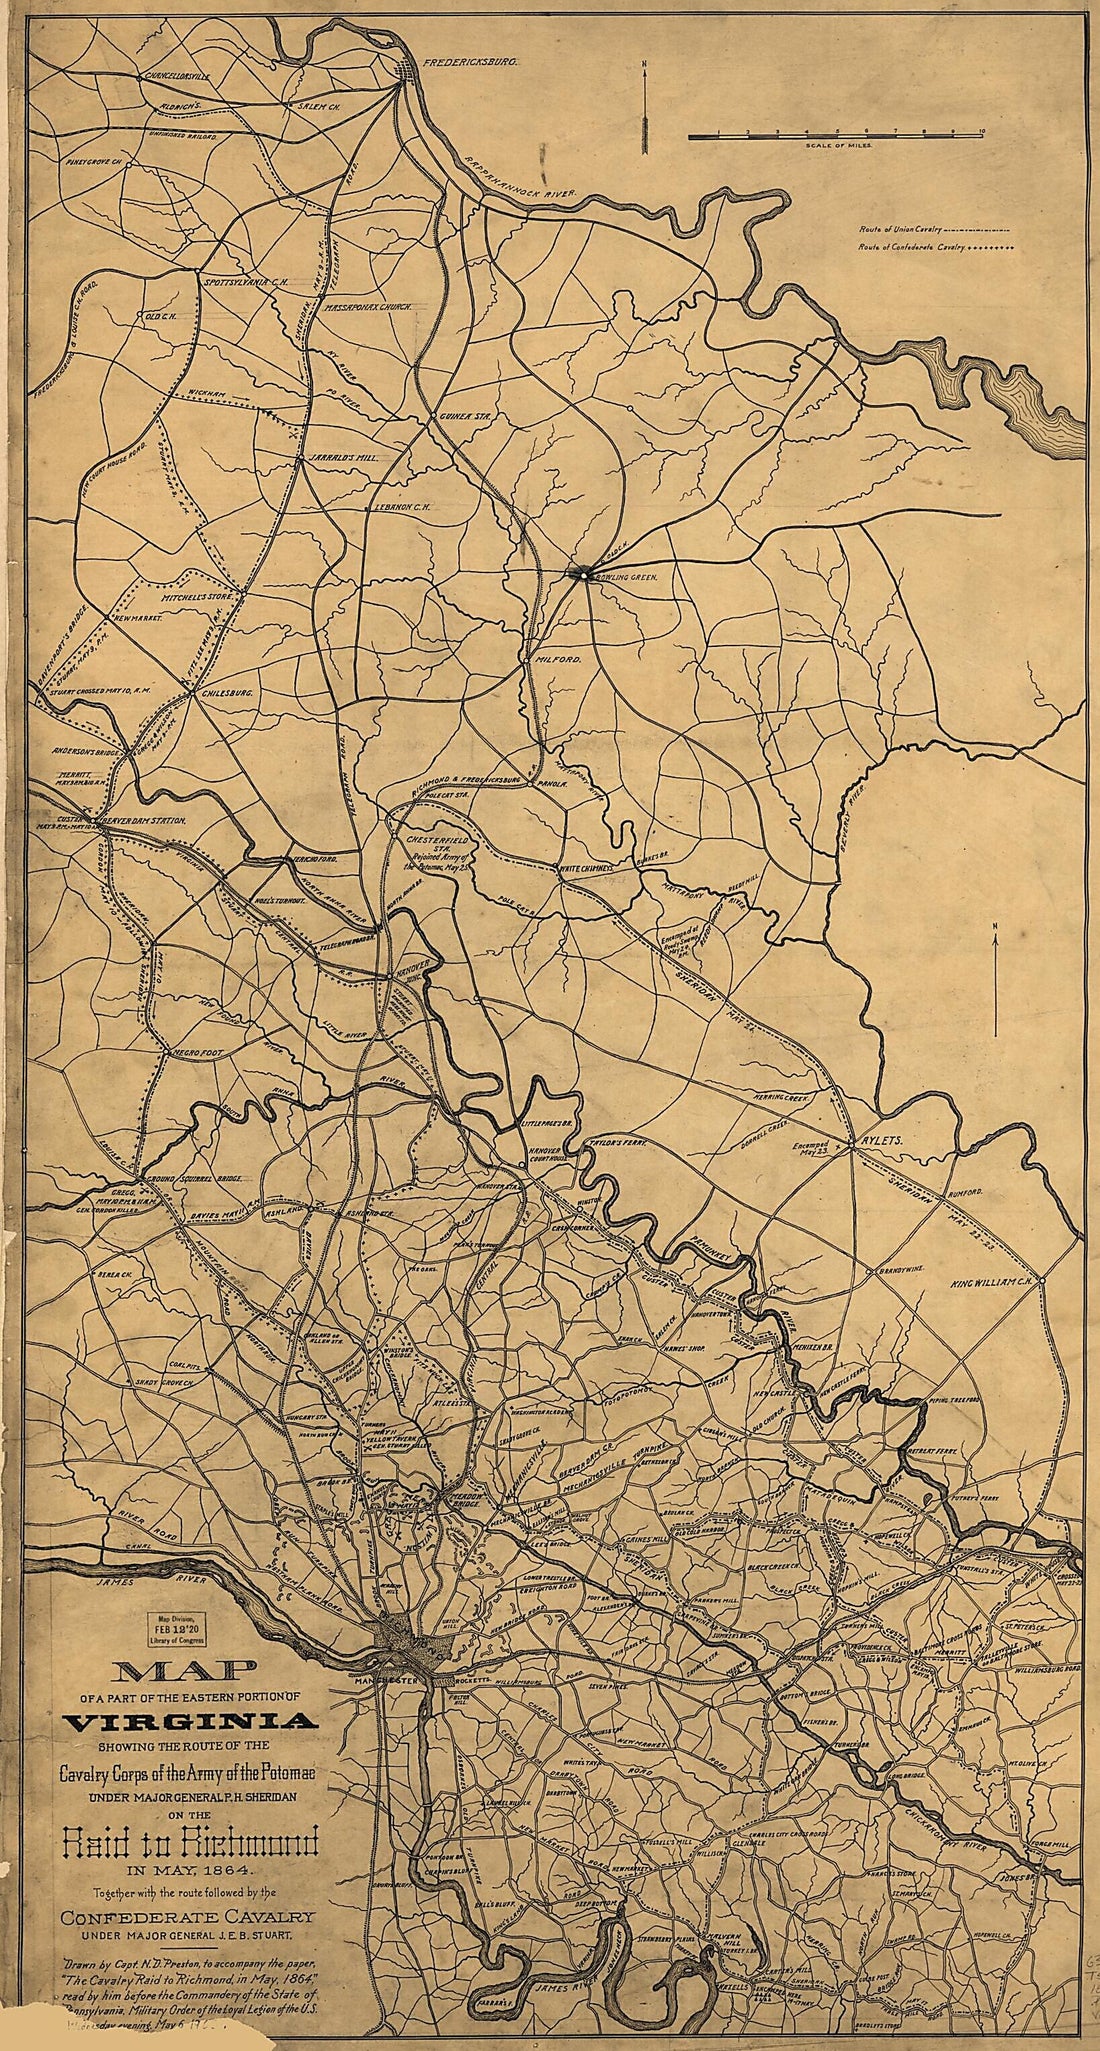 This old map of Map of a Part of the Eastern Portion of Virginia Showing the Route of the Cavalry Corps of the Army of the Potomac Under Major General P.H. Sheridan On the Raid to Richmond In May from 1864 : Together With the Route Followed by the Confed